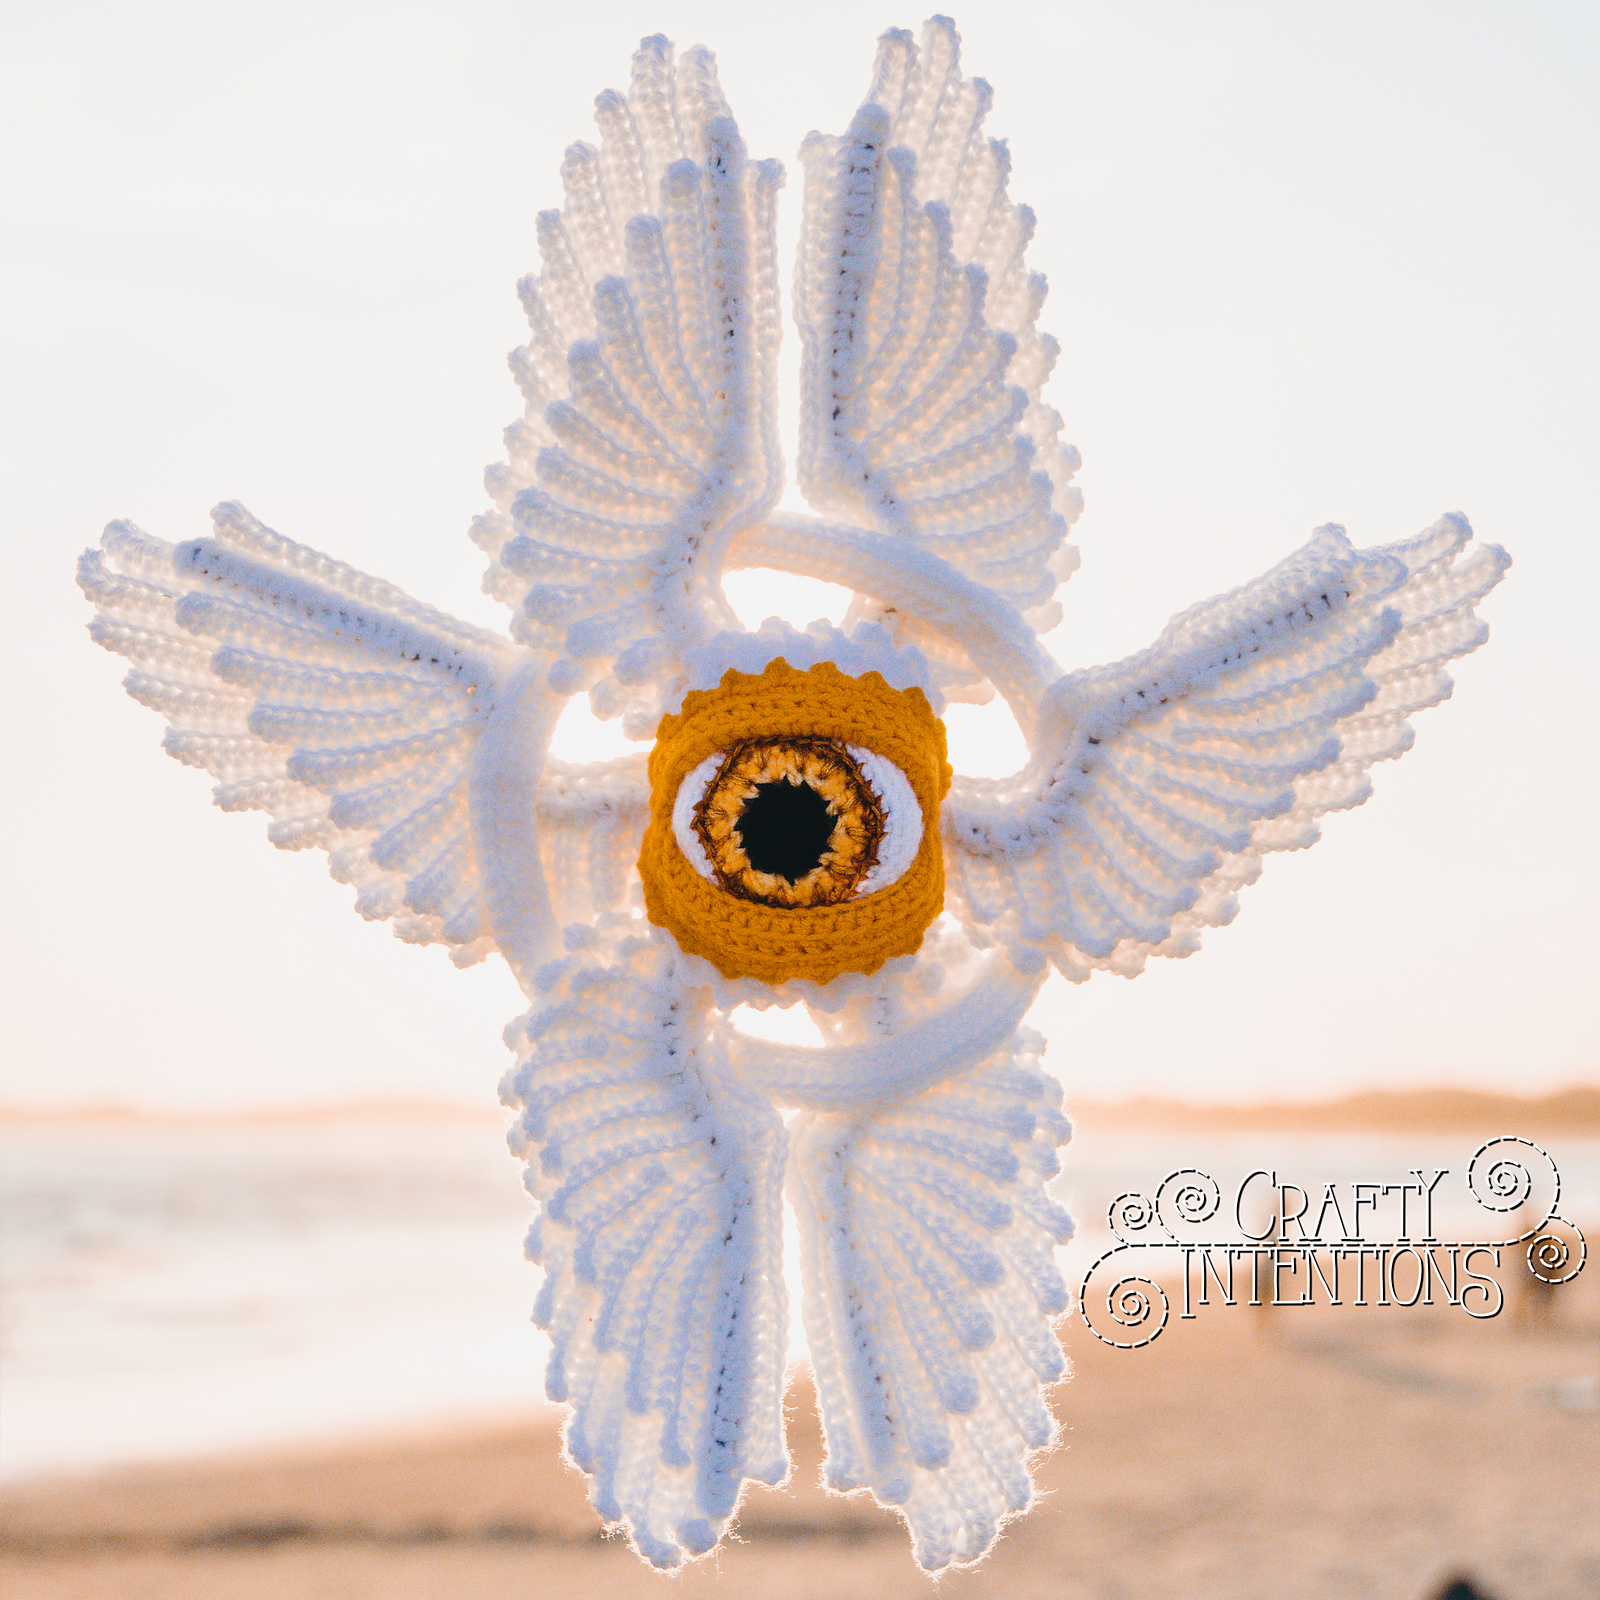 Crochet Your Own Seraph, Designed By Megan Lapp of Crafty Intentions